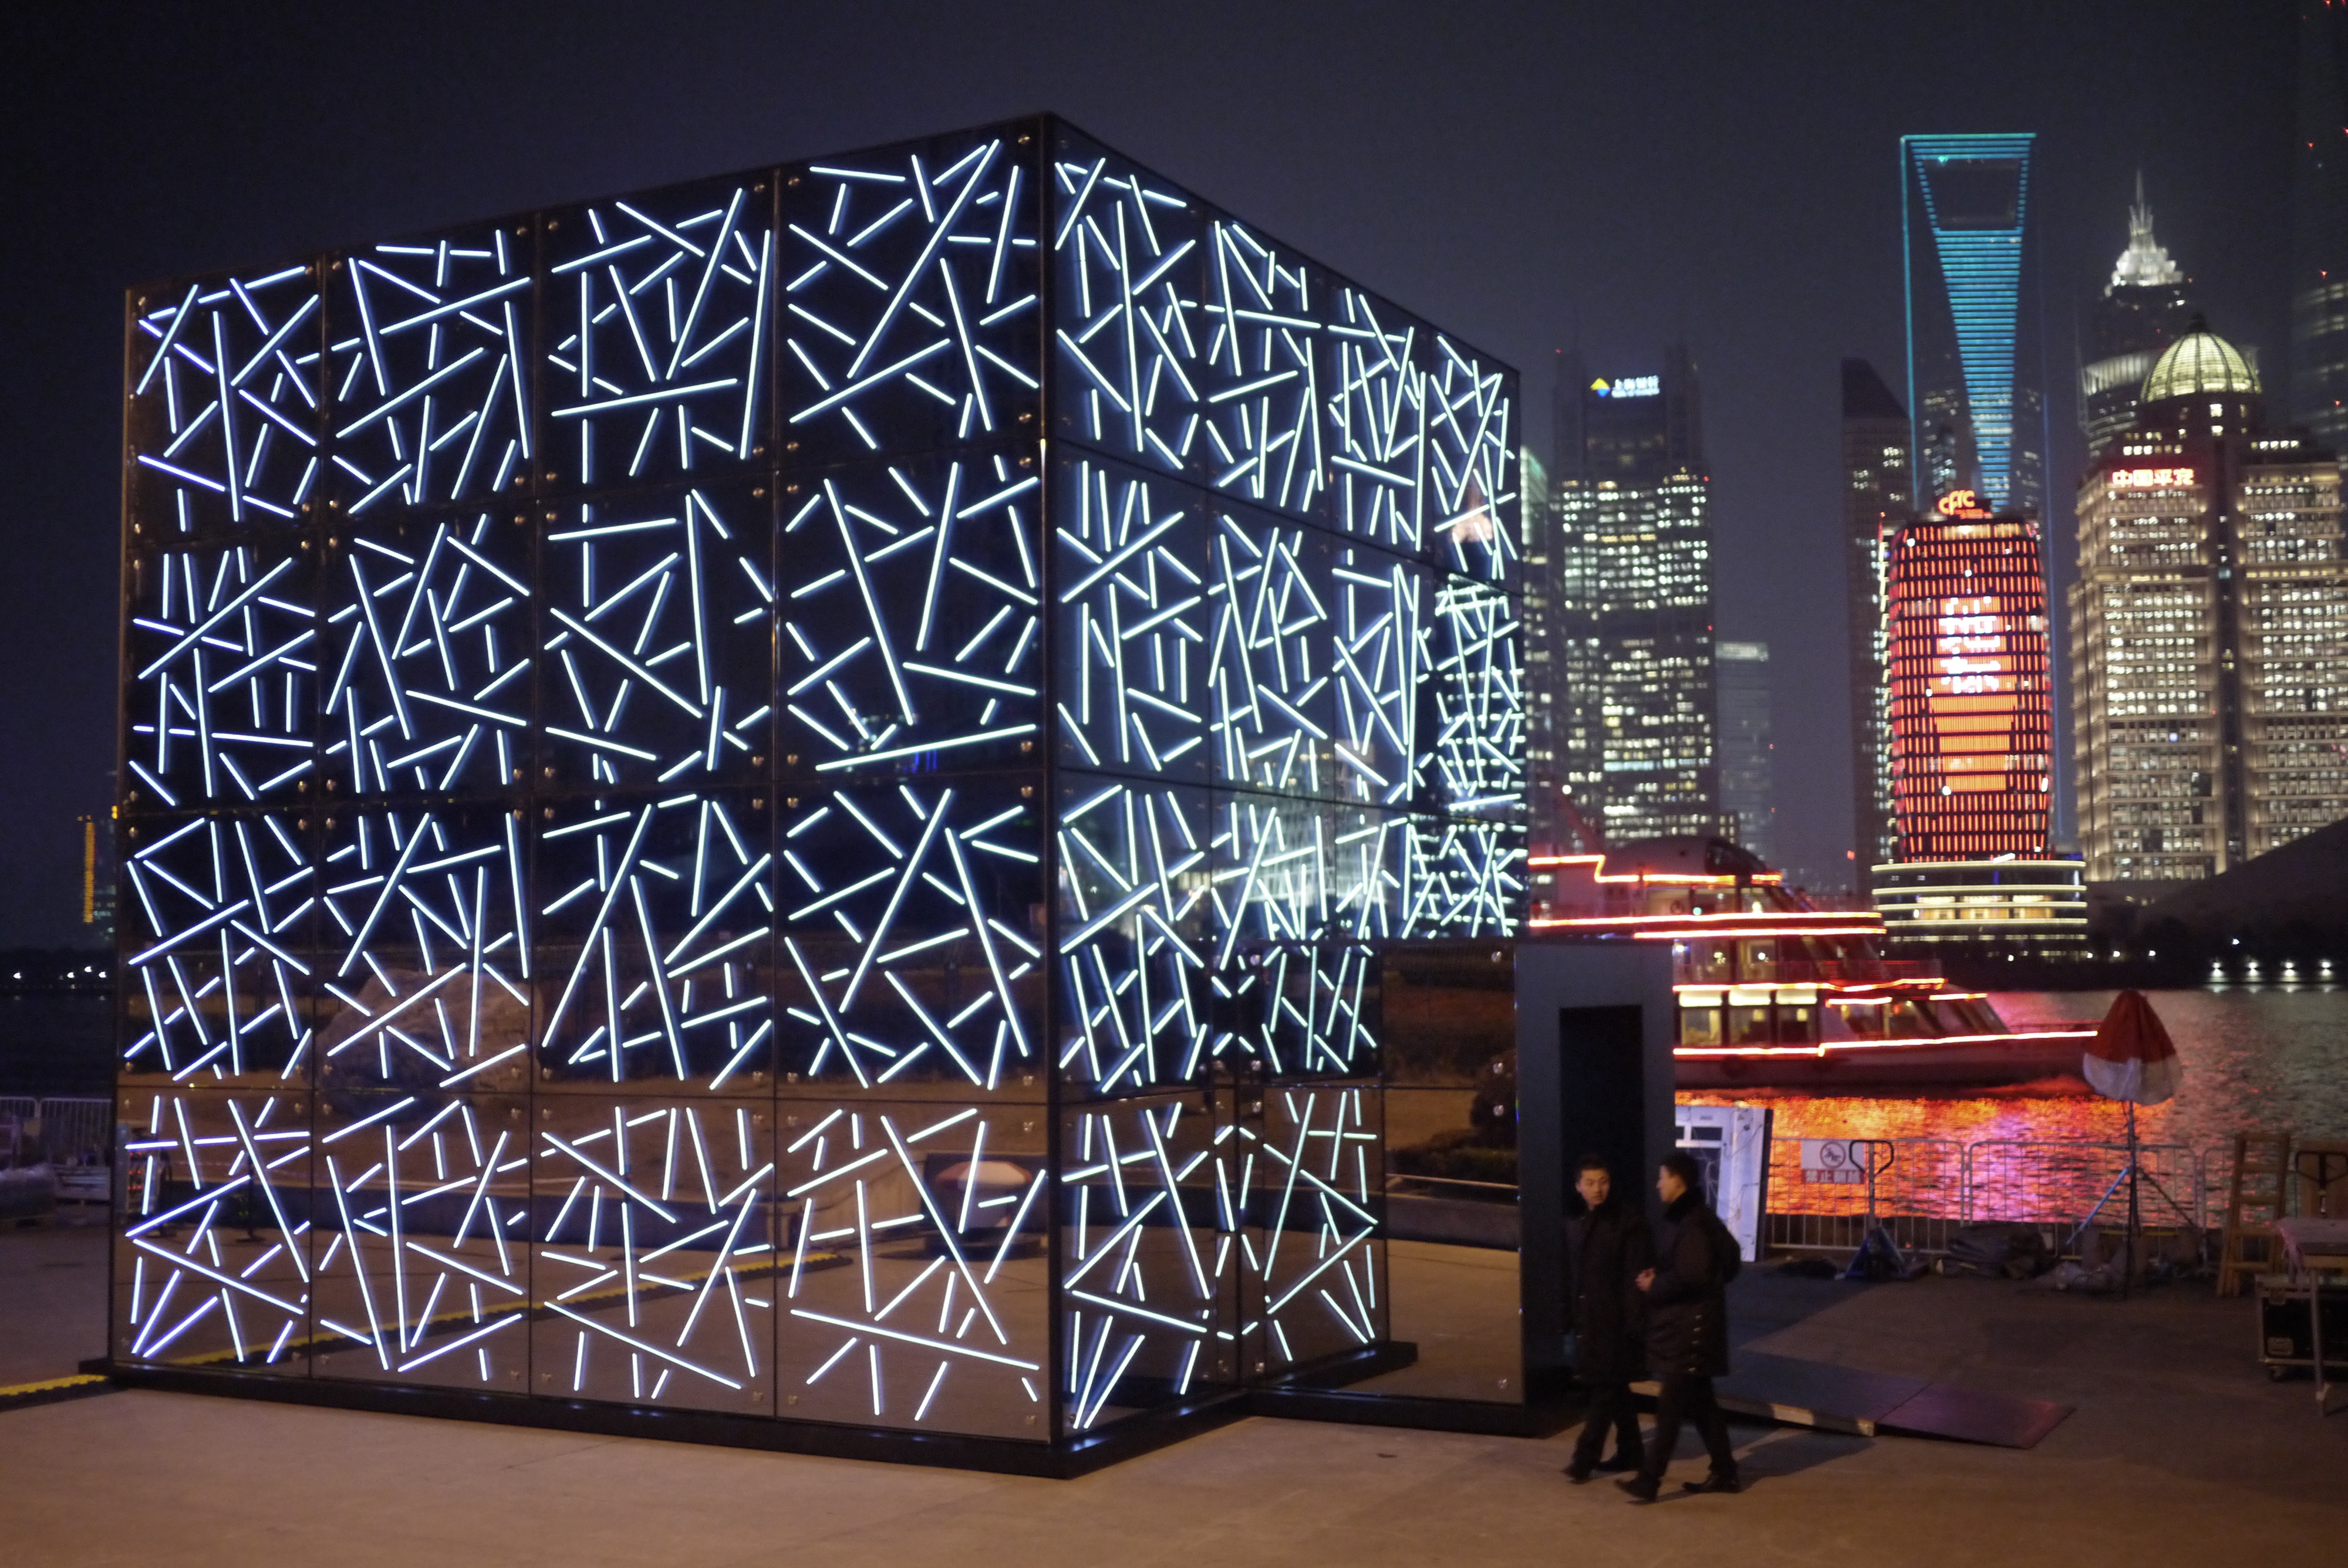 The Future Sensations exhibition in Shanghai, China in January 2015. (Photo credit: Saint-Gobain Corporation)